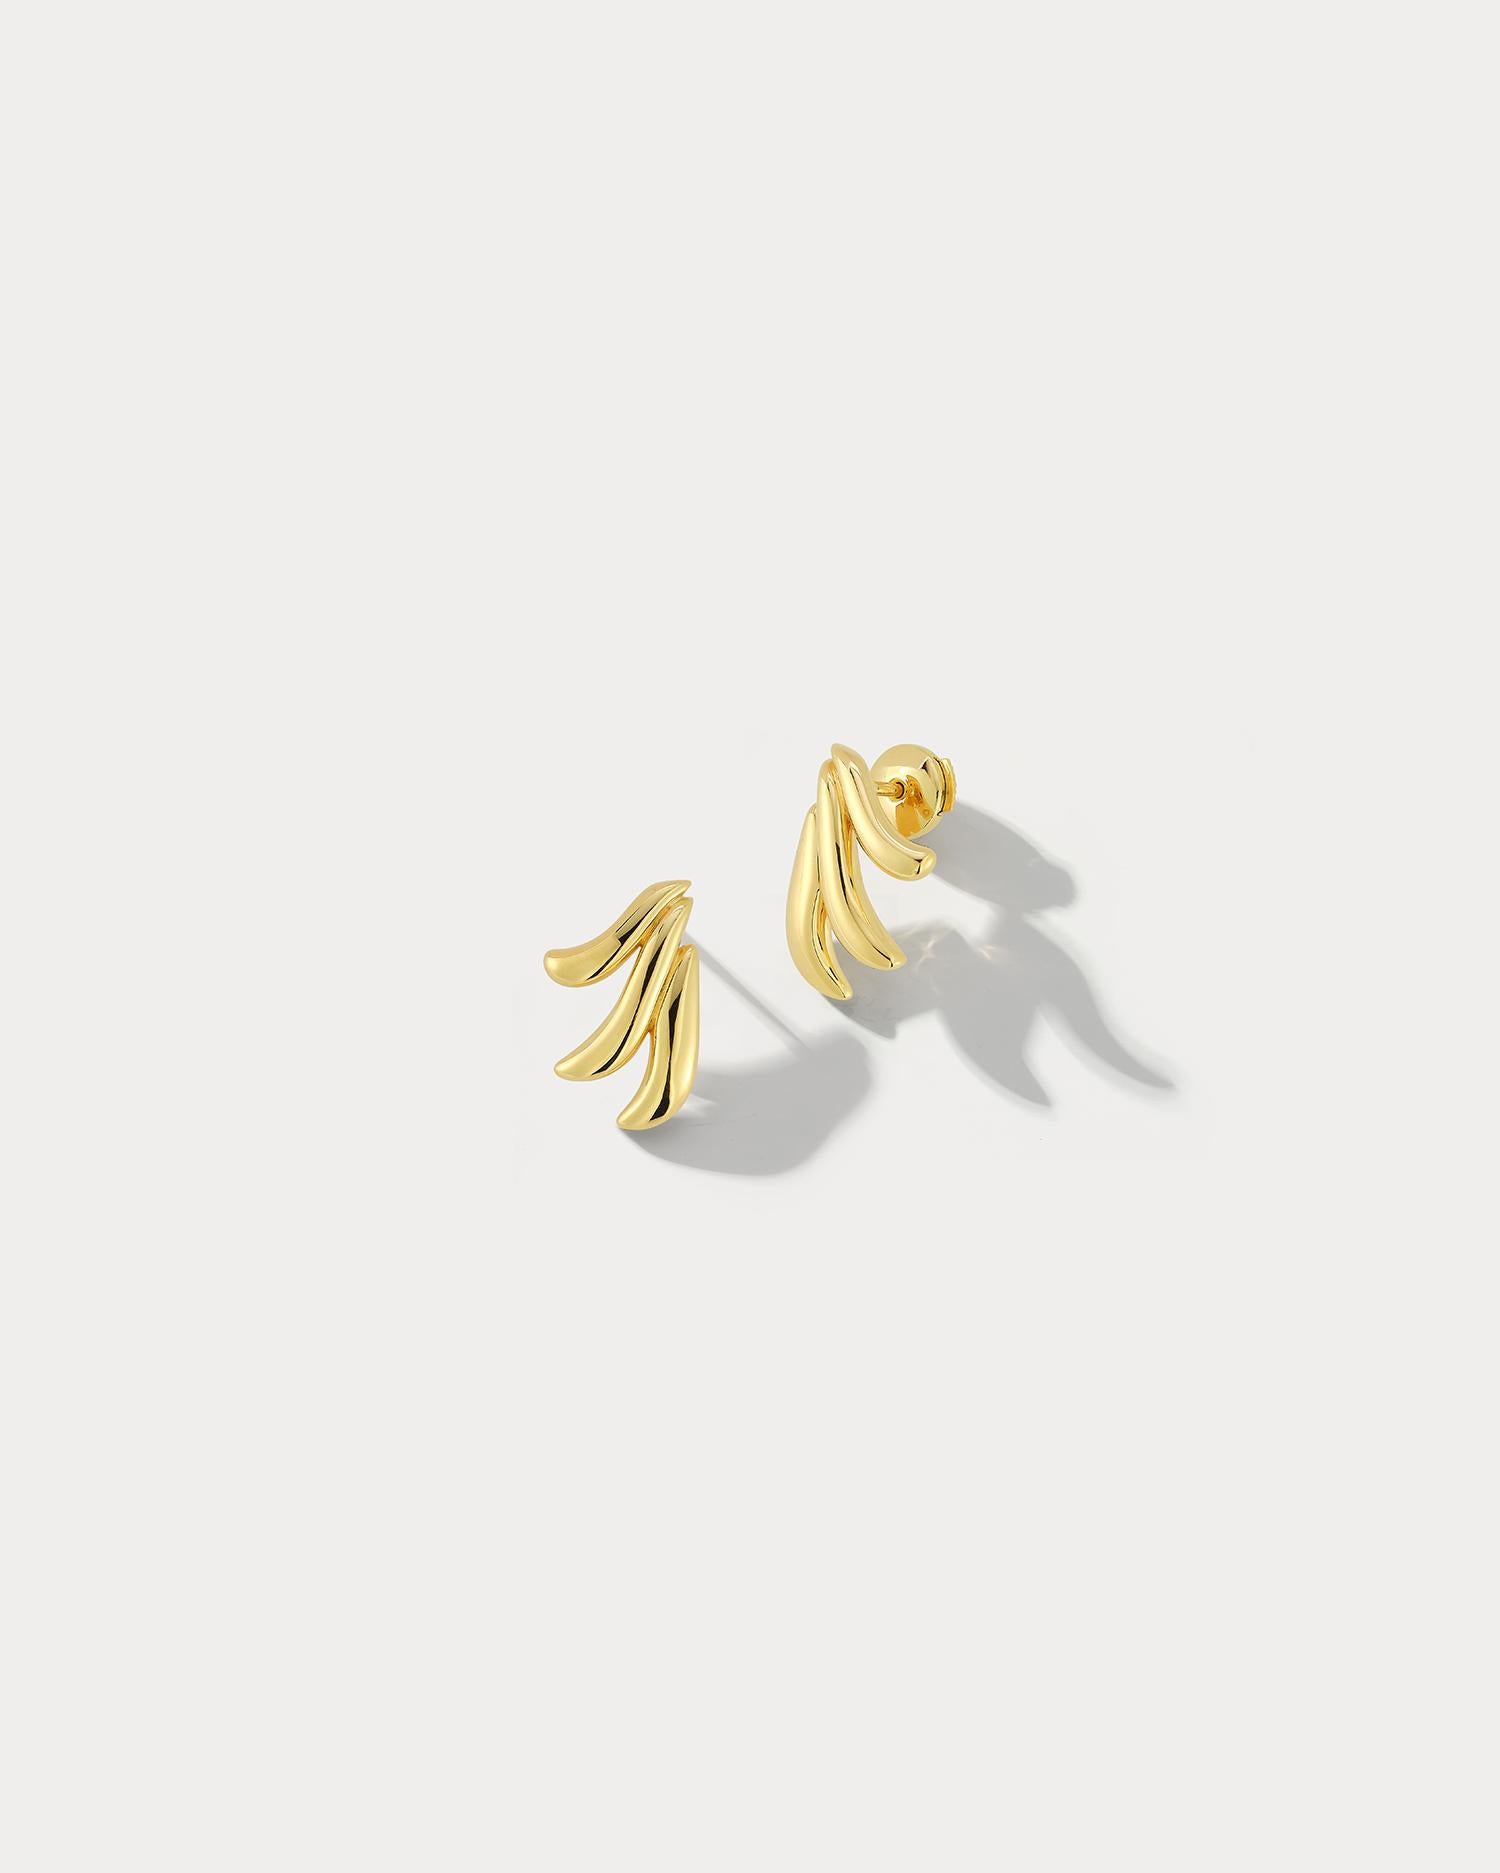 Introducing our stunning 18k yellow gold three leaf earrings, a perfect blend of elegance and sophistication. These earrings feature three delicate leaves crafted from 18k yellow gold, symbolizing intellectual, emotional, and will aspects of the